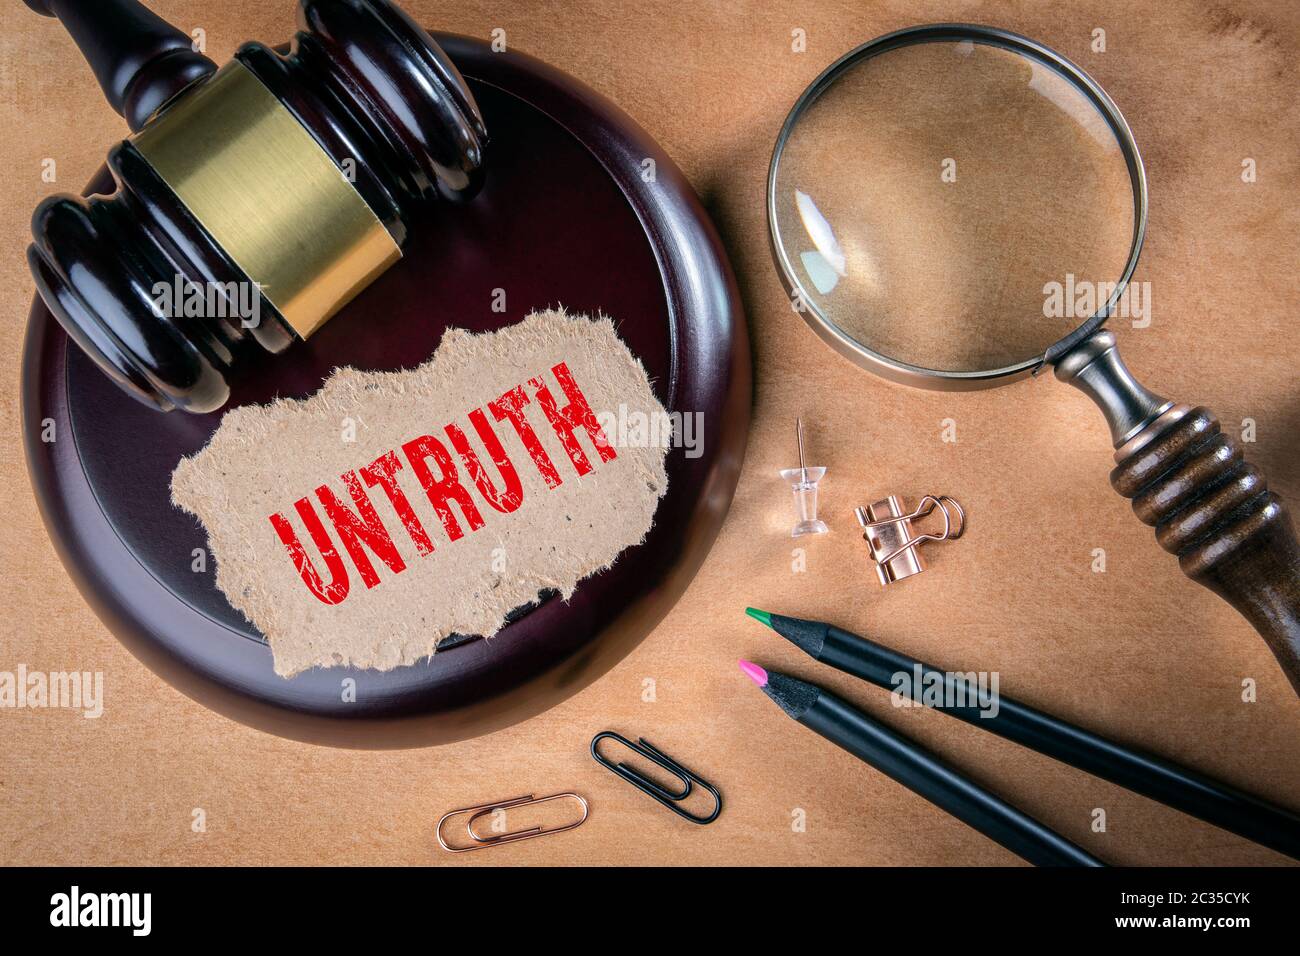 UNTRUTH. Law, regulations and judgment concept. Judge's hammer, stationery and magnifying glass on the table Stock Photo